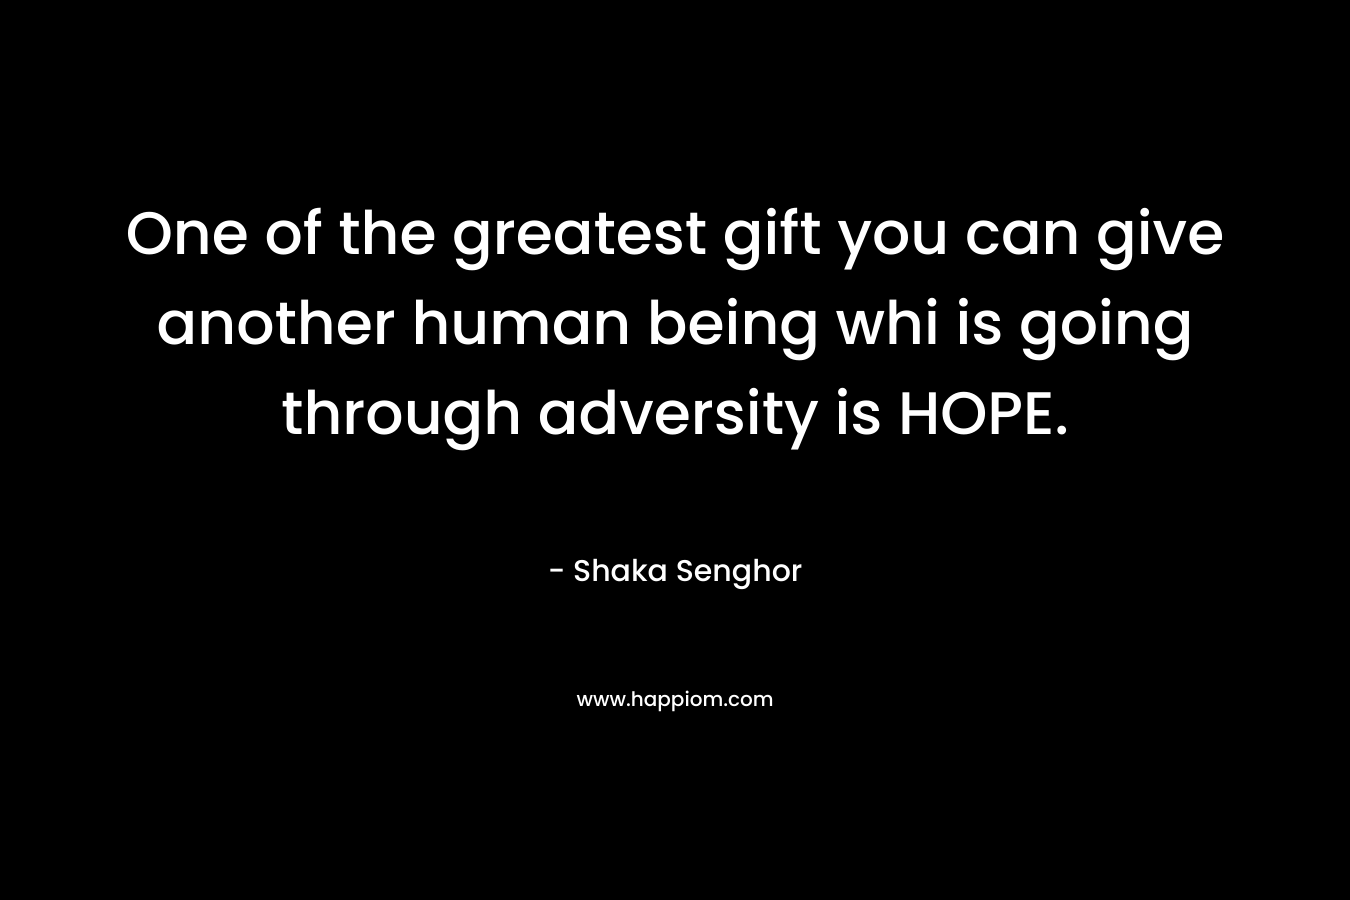 One of the greatest gift you can give another human being whi is going through adversity is HOPE.